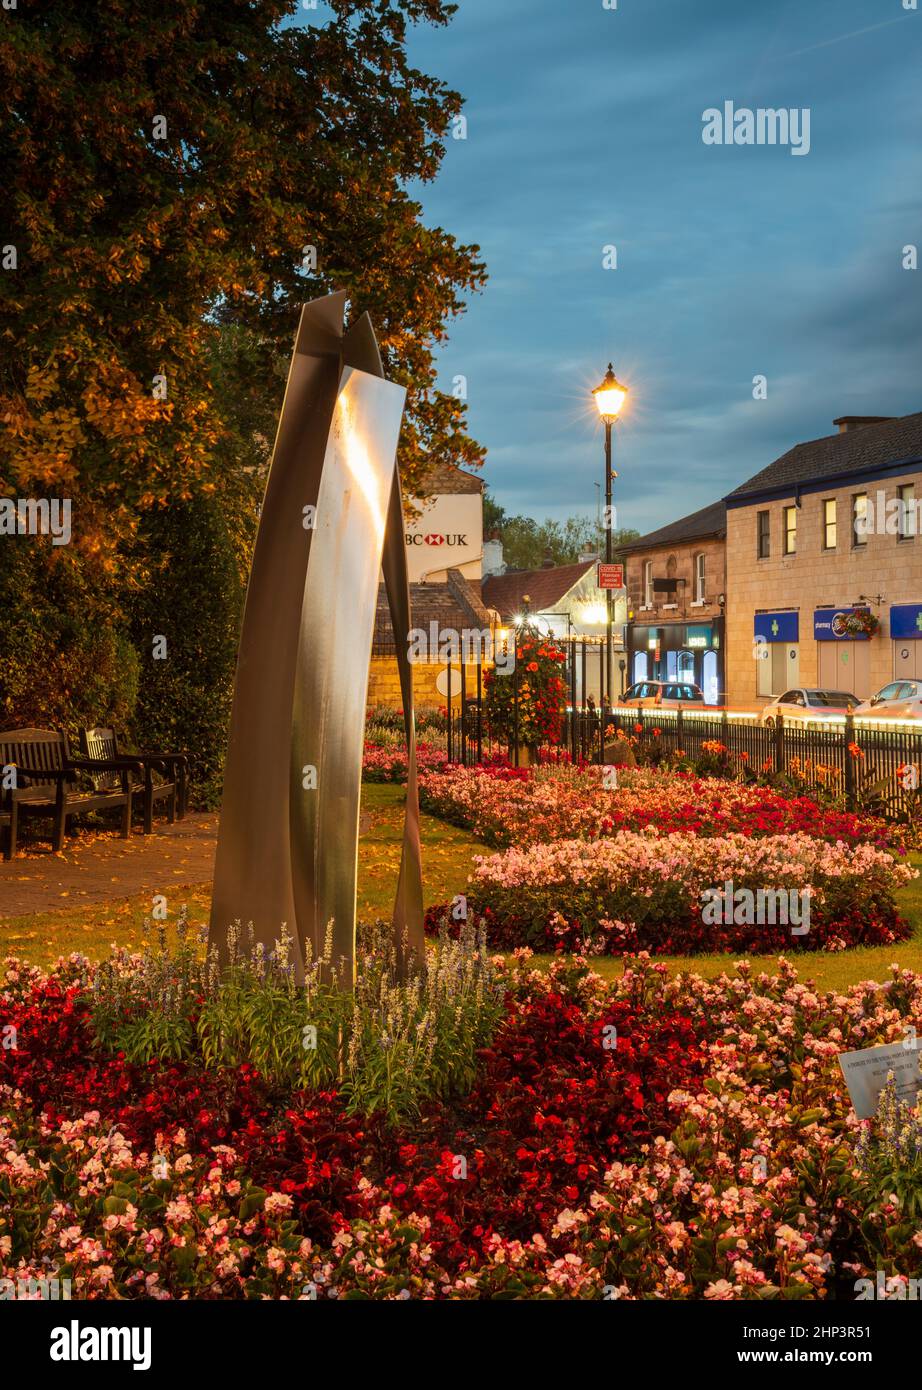 Evening view of the Garden of Rest in the centre of Wetherby, West Yorkshire with a stainless steel sculpture in the foreground Stock Photo